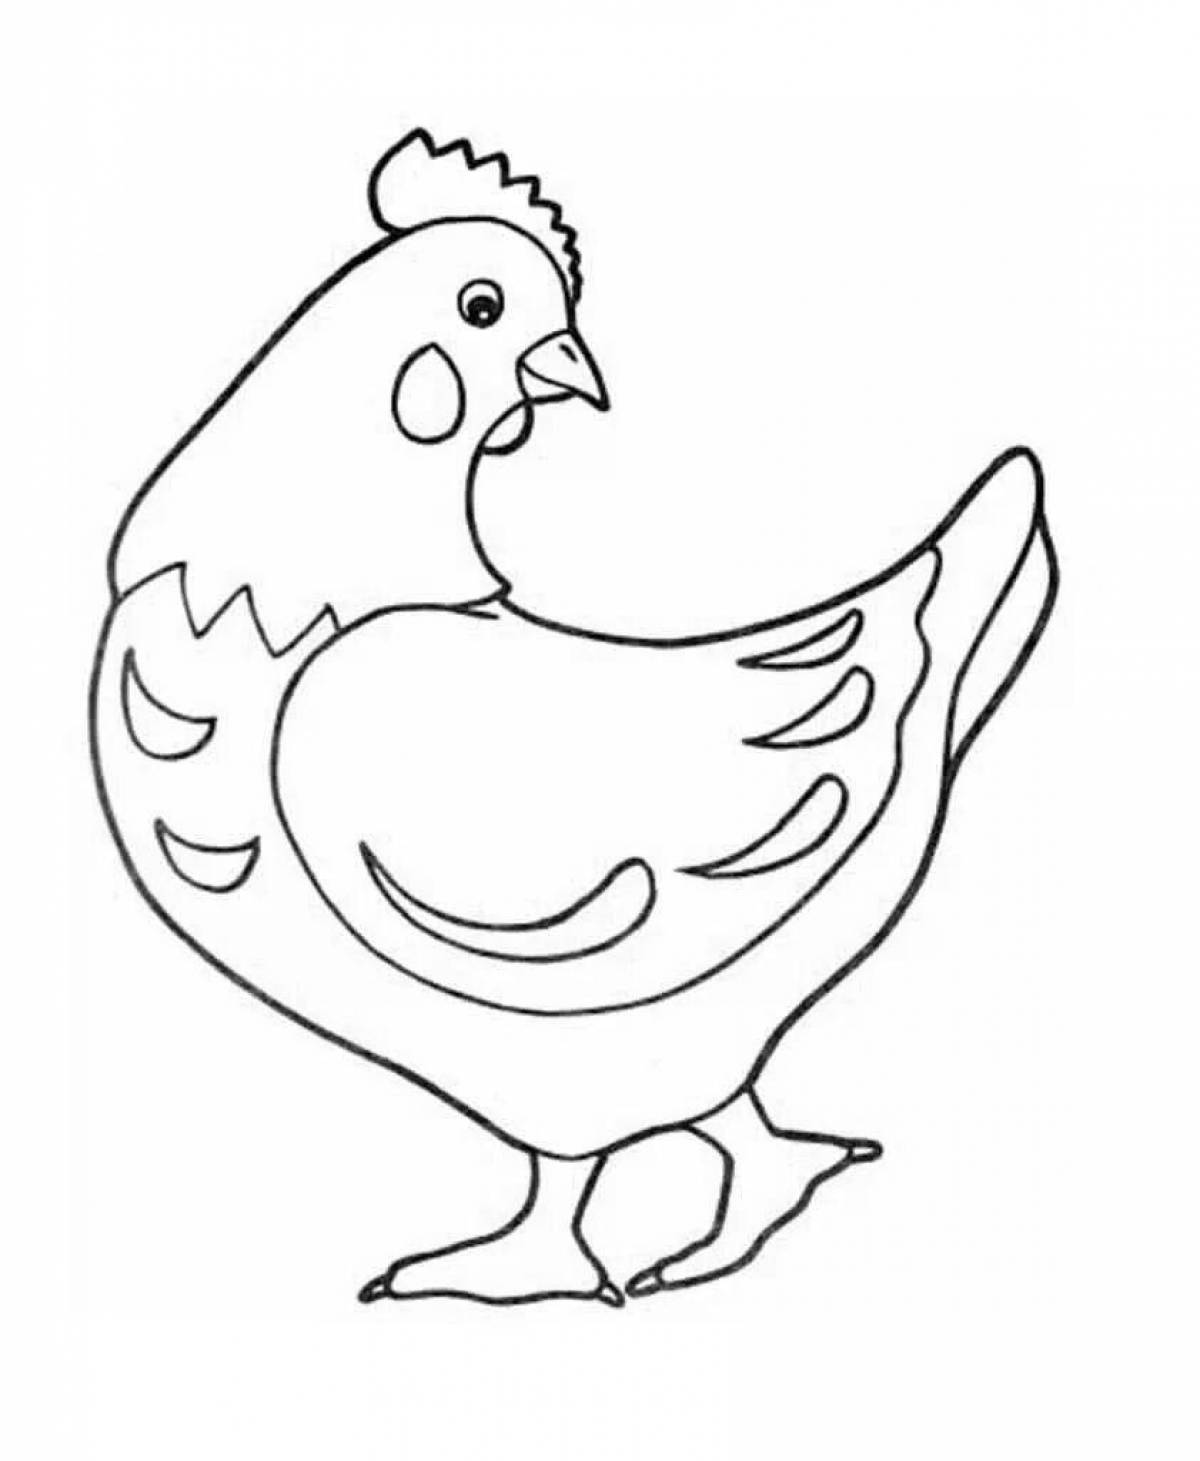 Vibrant poultry coloring page